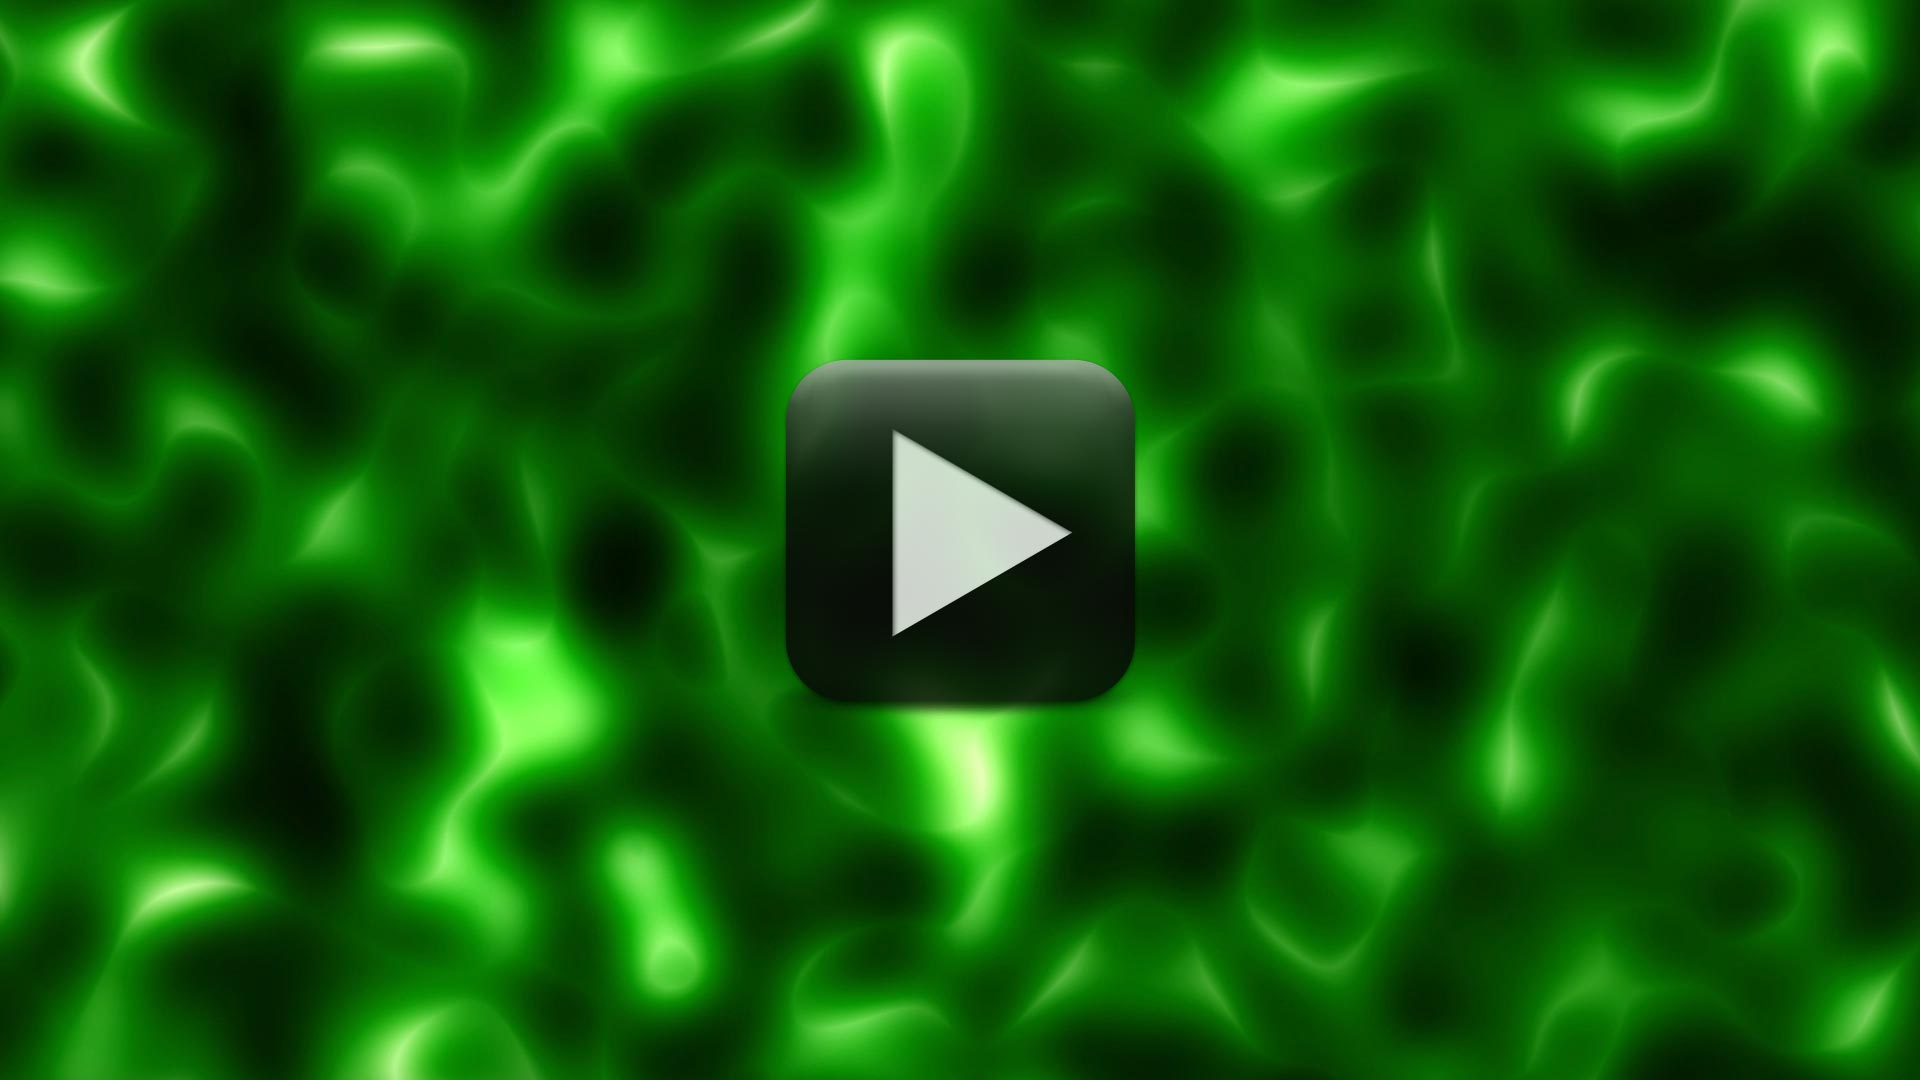 Moving Bacteria Animations Video Background - All Design Creative